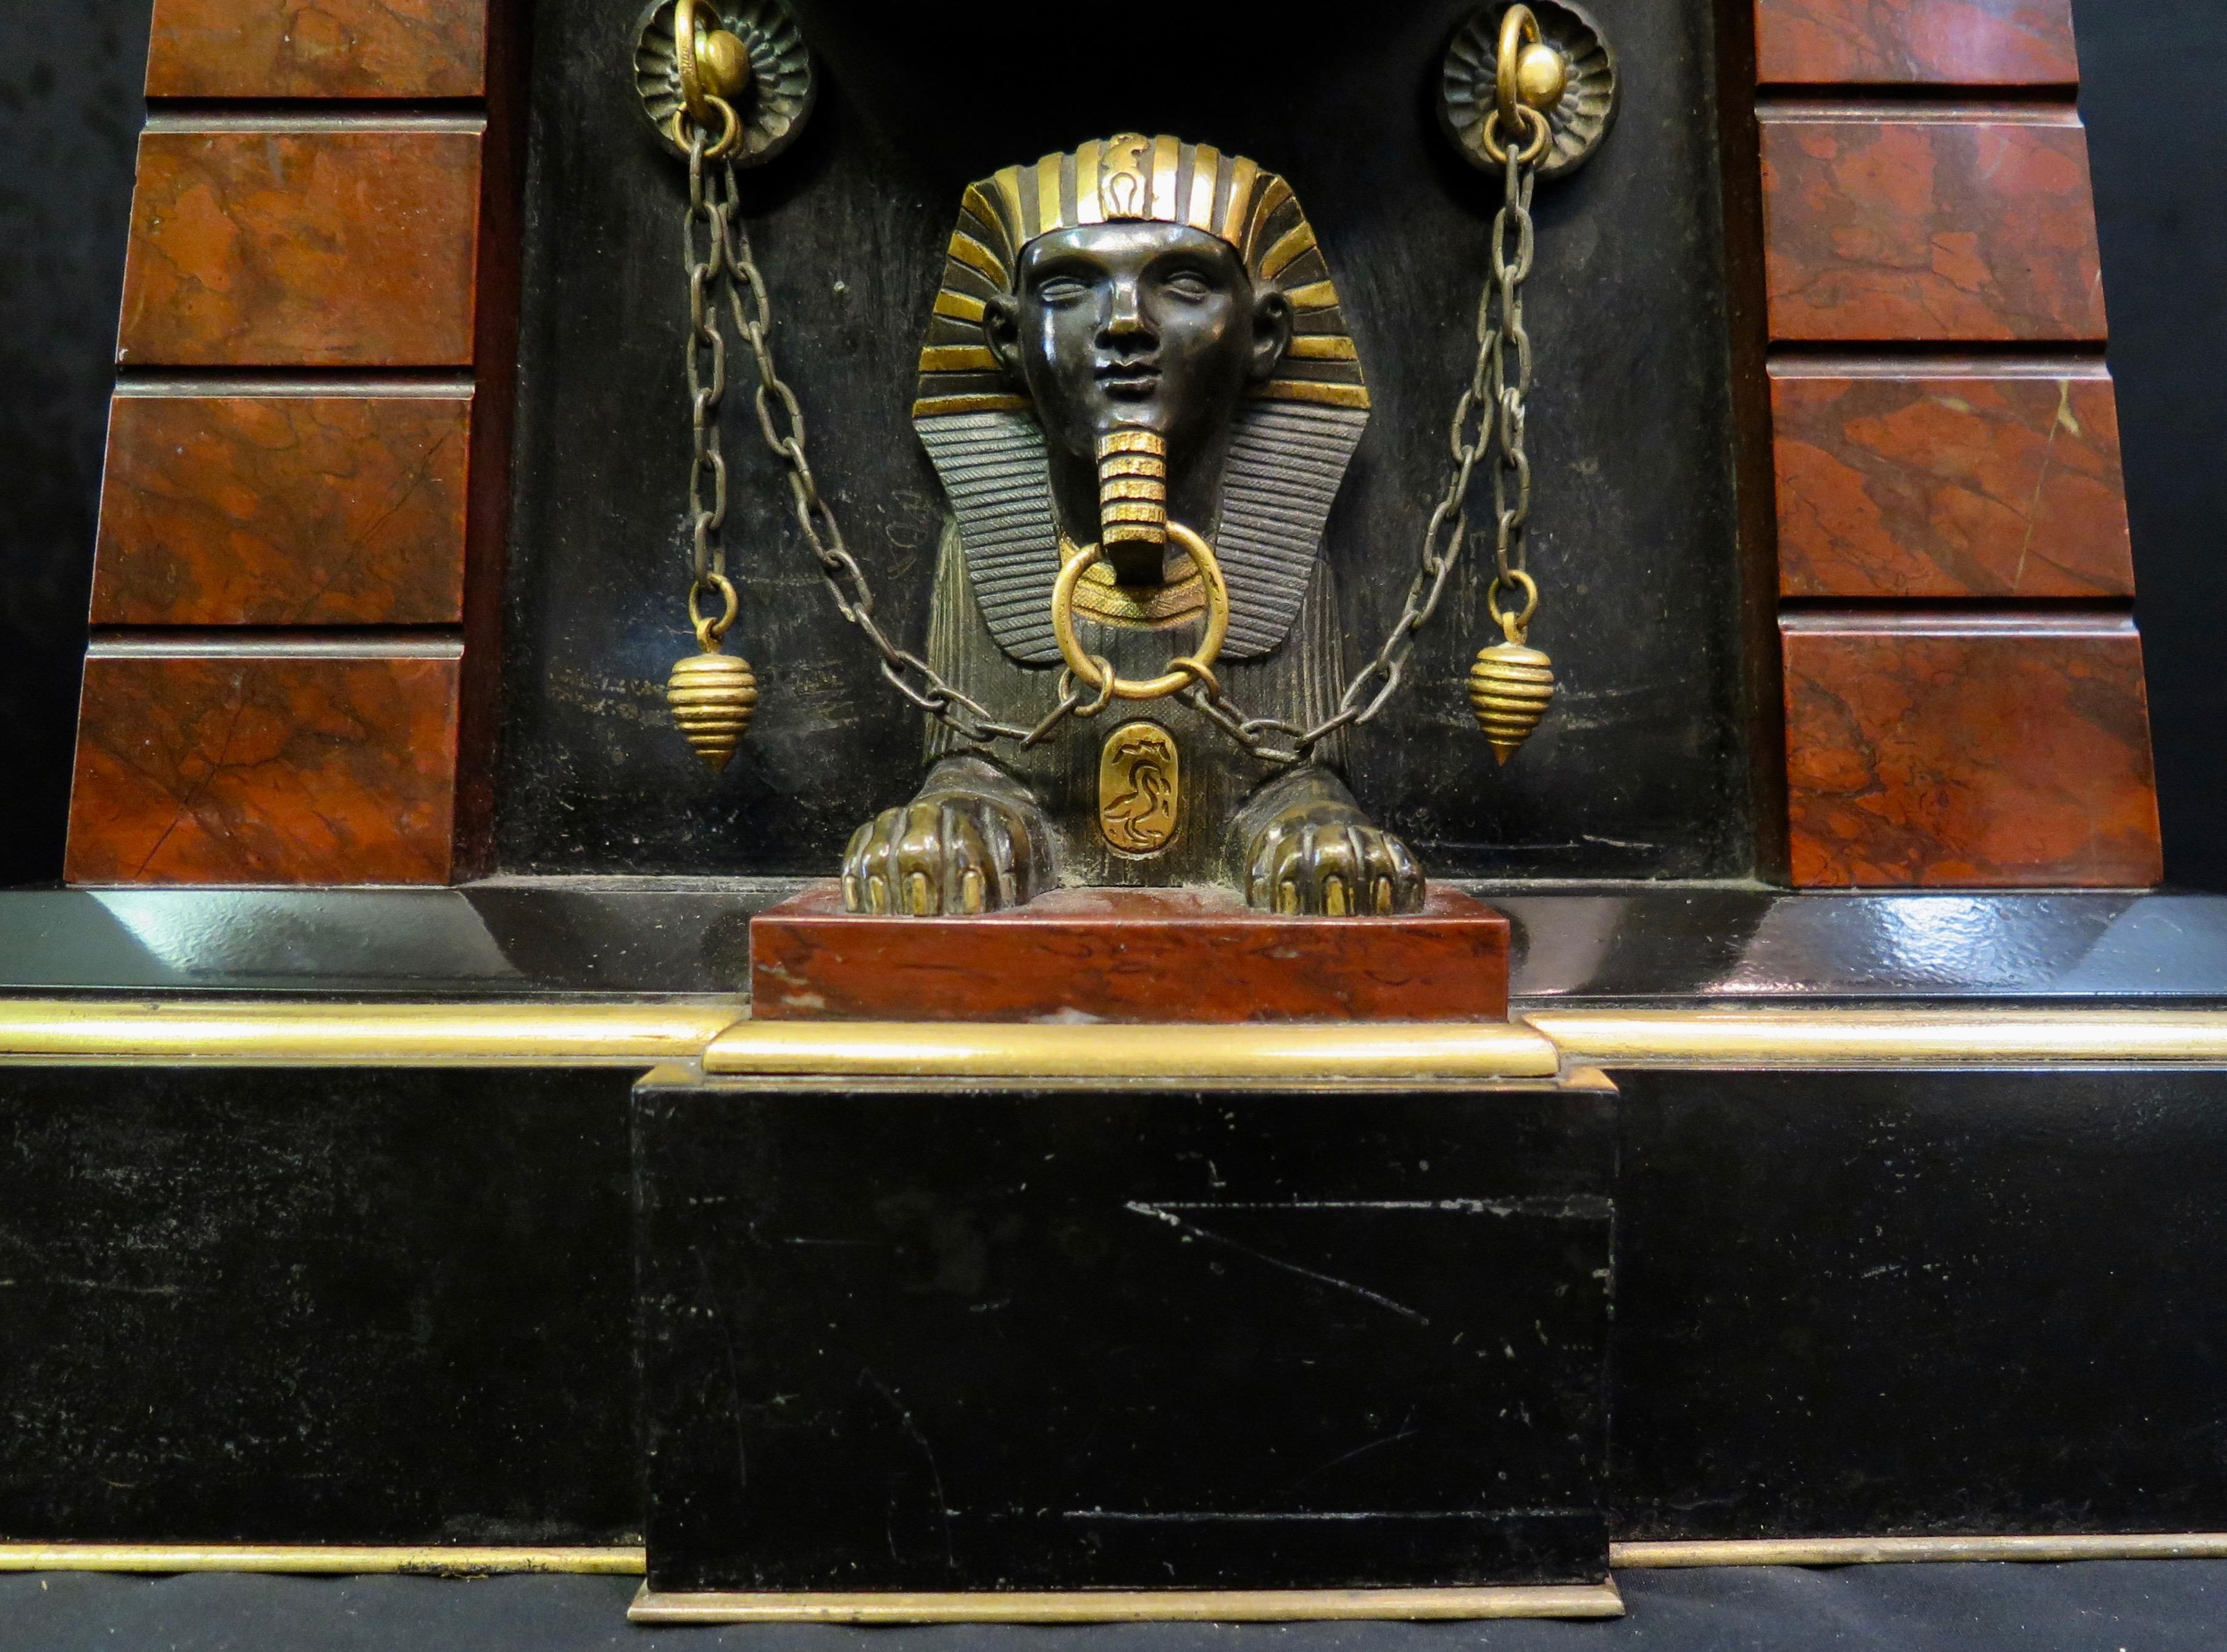 The clock having domed trapezoidal case, dome with bronze relief to front depicting a partial gilt Egyptian goddess, Isis, flanked by cobras and lotus scrolls, red marble ribbed columns to sides, clock face with gilt egg-and-dart border, gilt hands